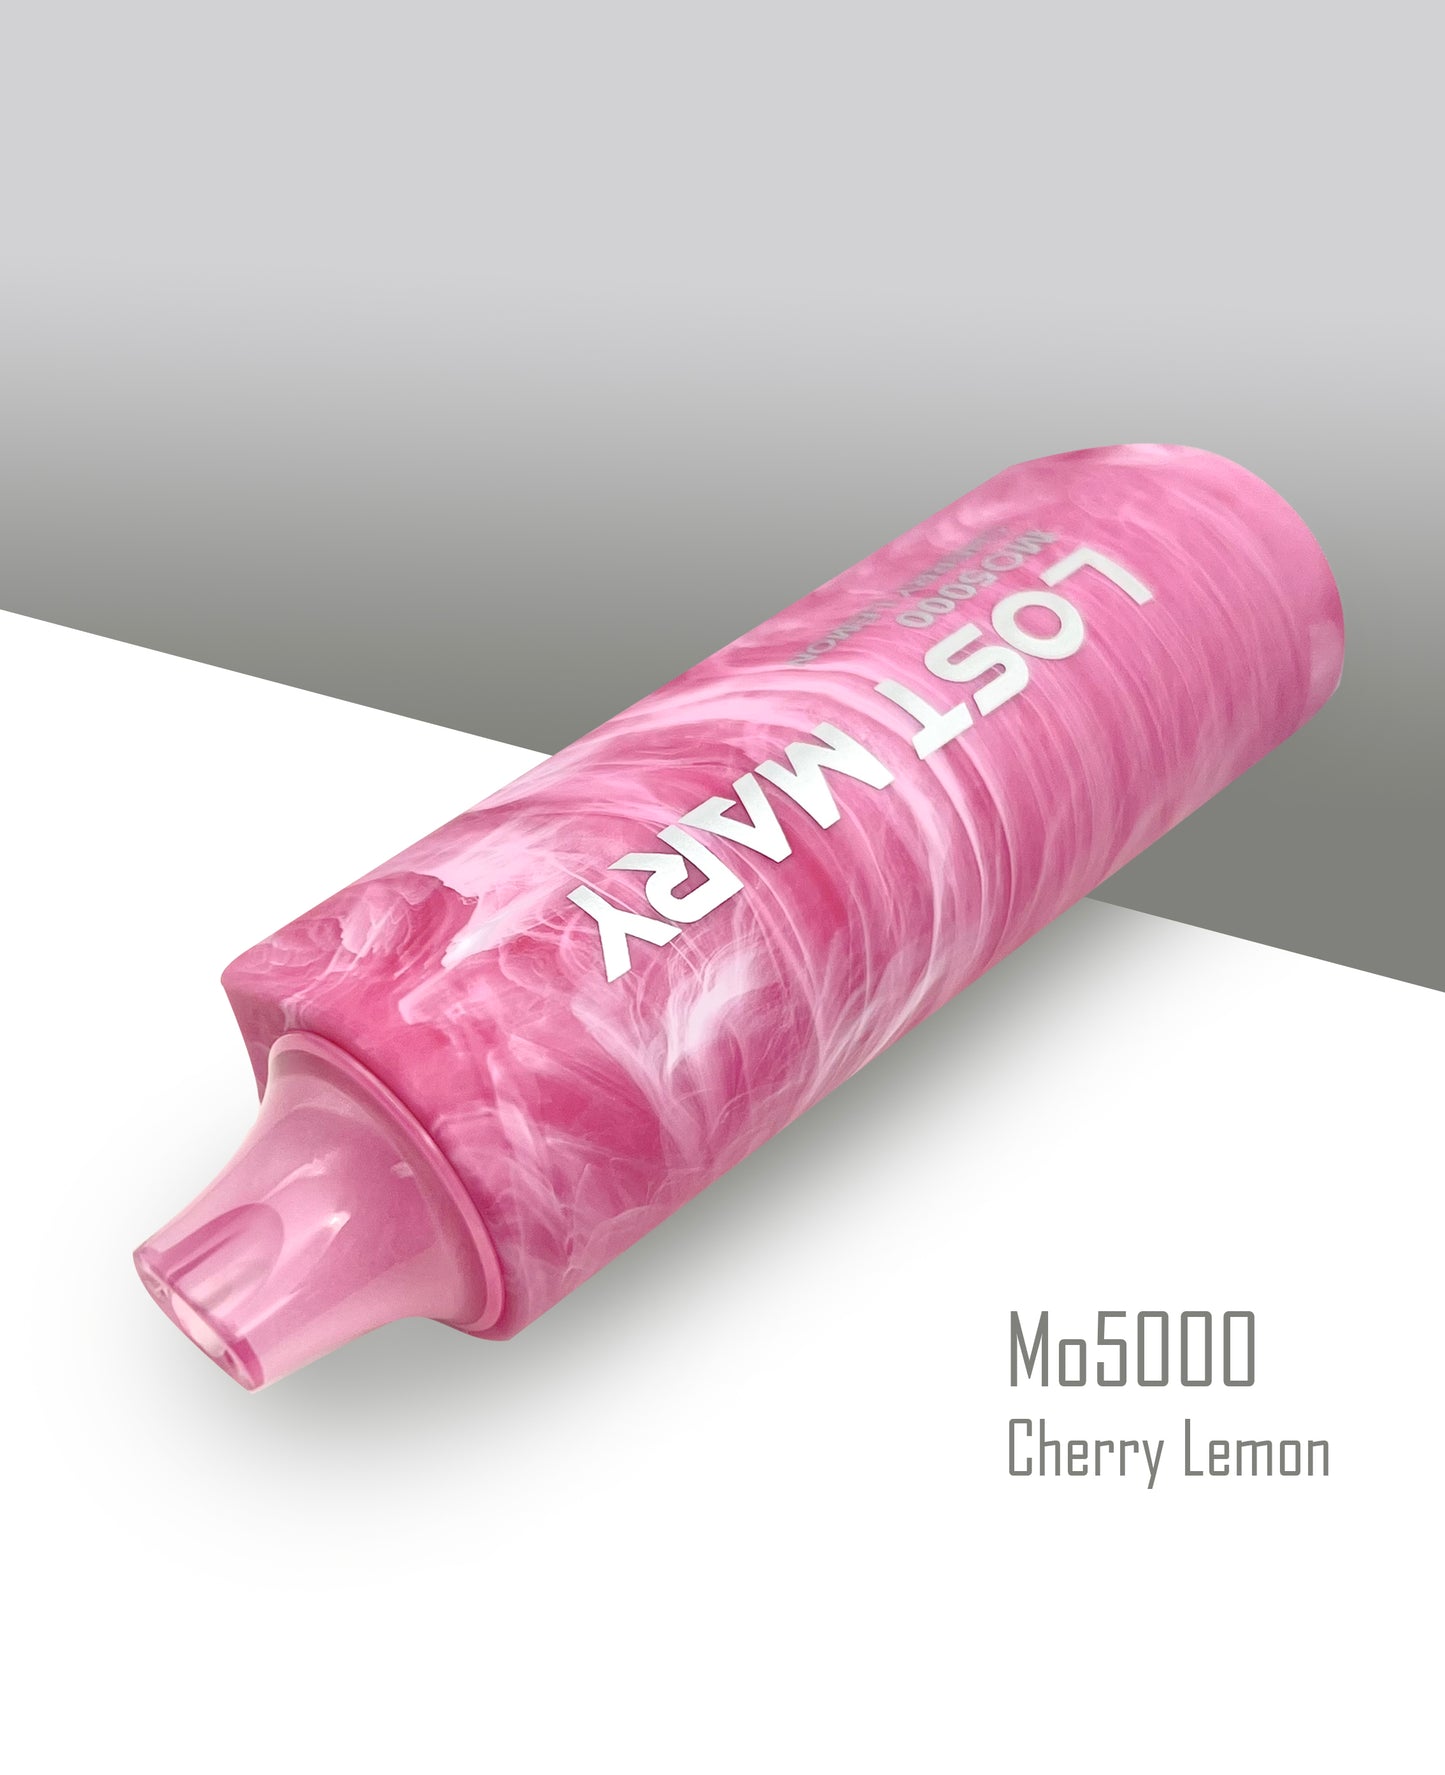 Vape Central Wholesale| Lost Marry Mo5000 | Disposable vape wholesale| Lost Mary MO5000 vape wholesale| lost mary mo5000 flavor cherry lemon